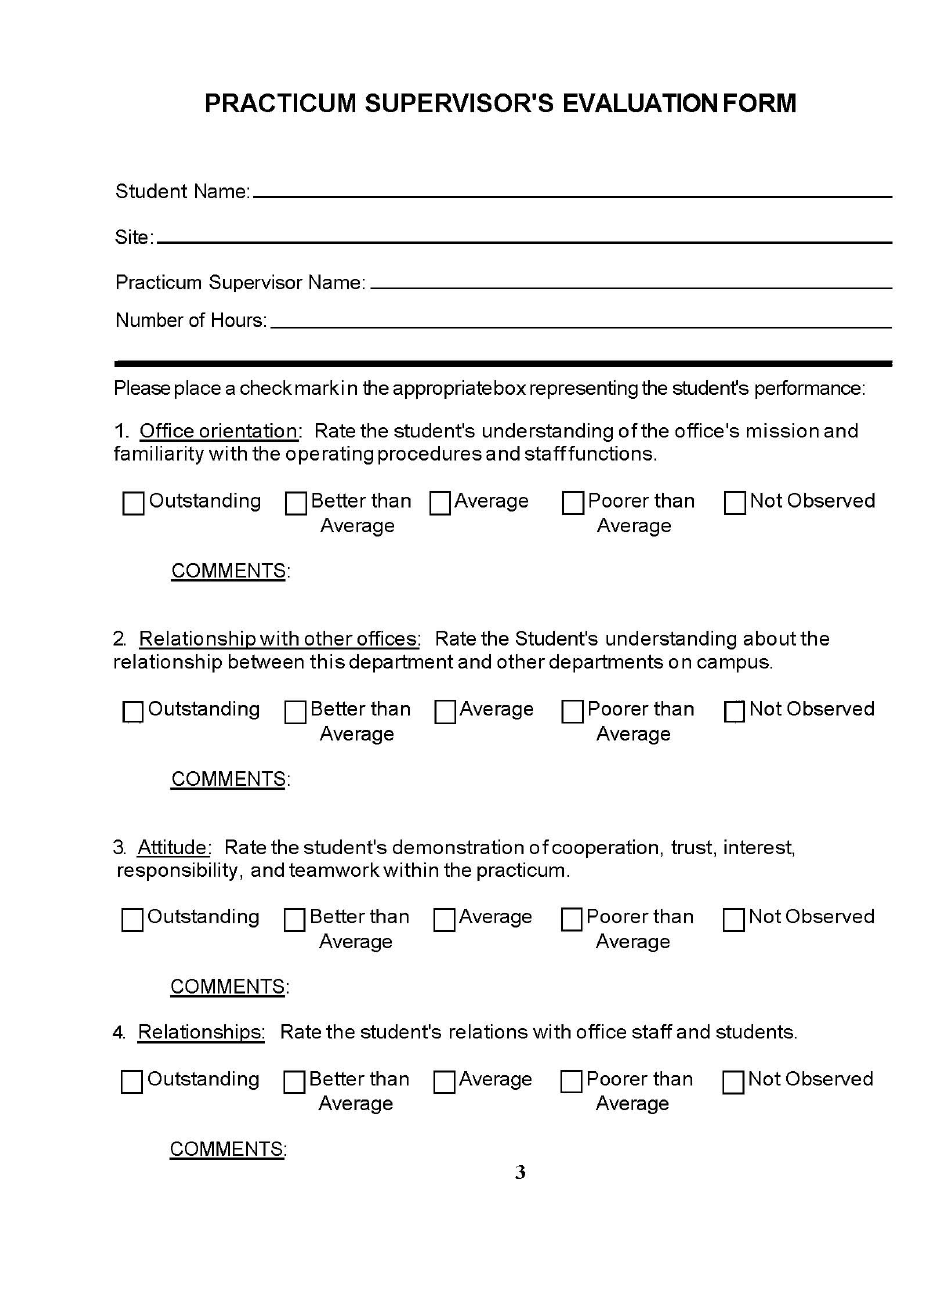 Practicum Suprevisors Evaluation Form, Page 1